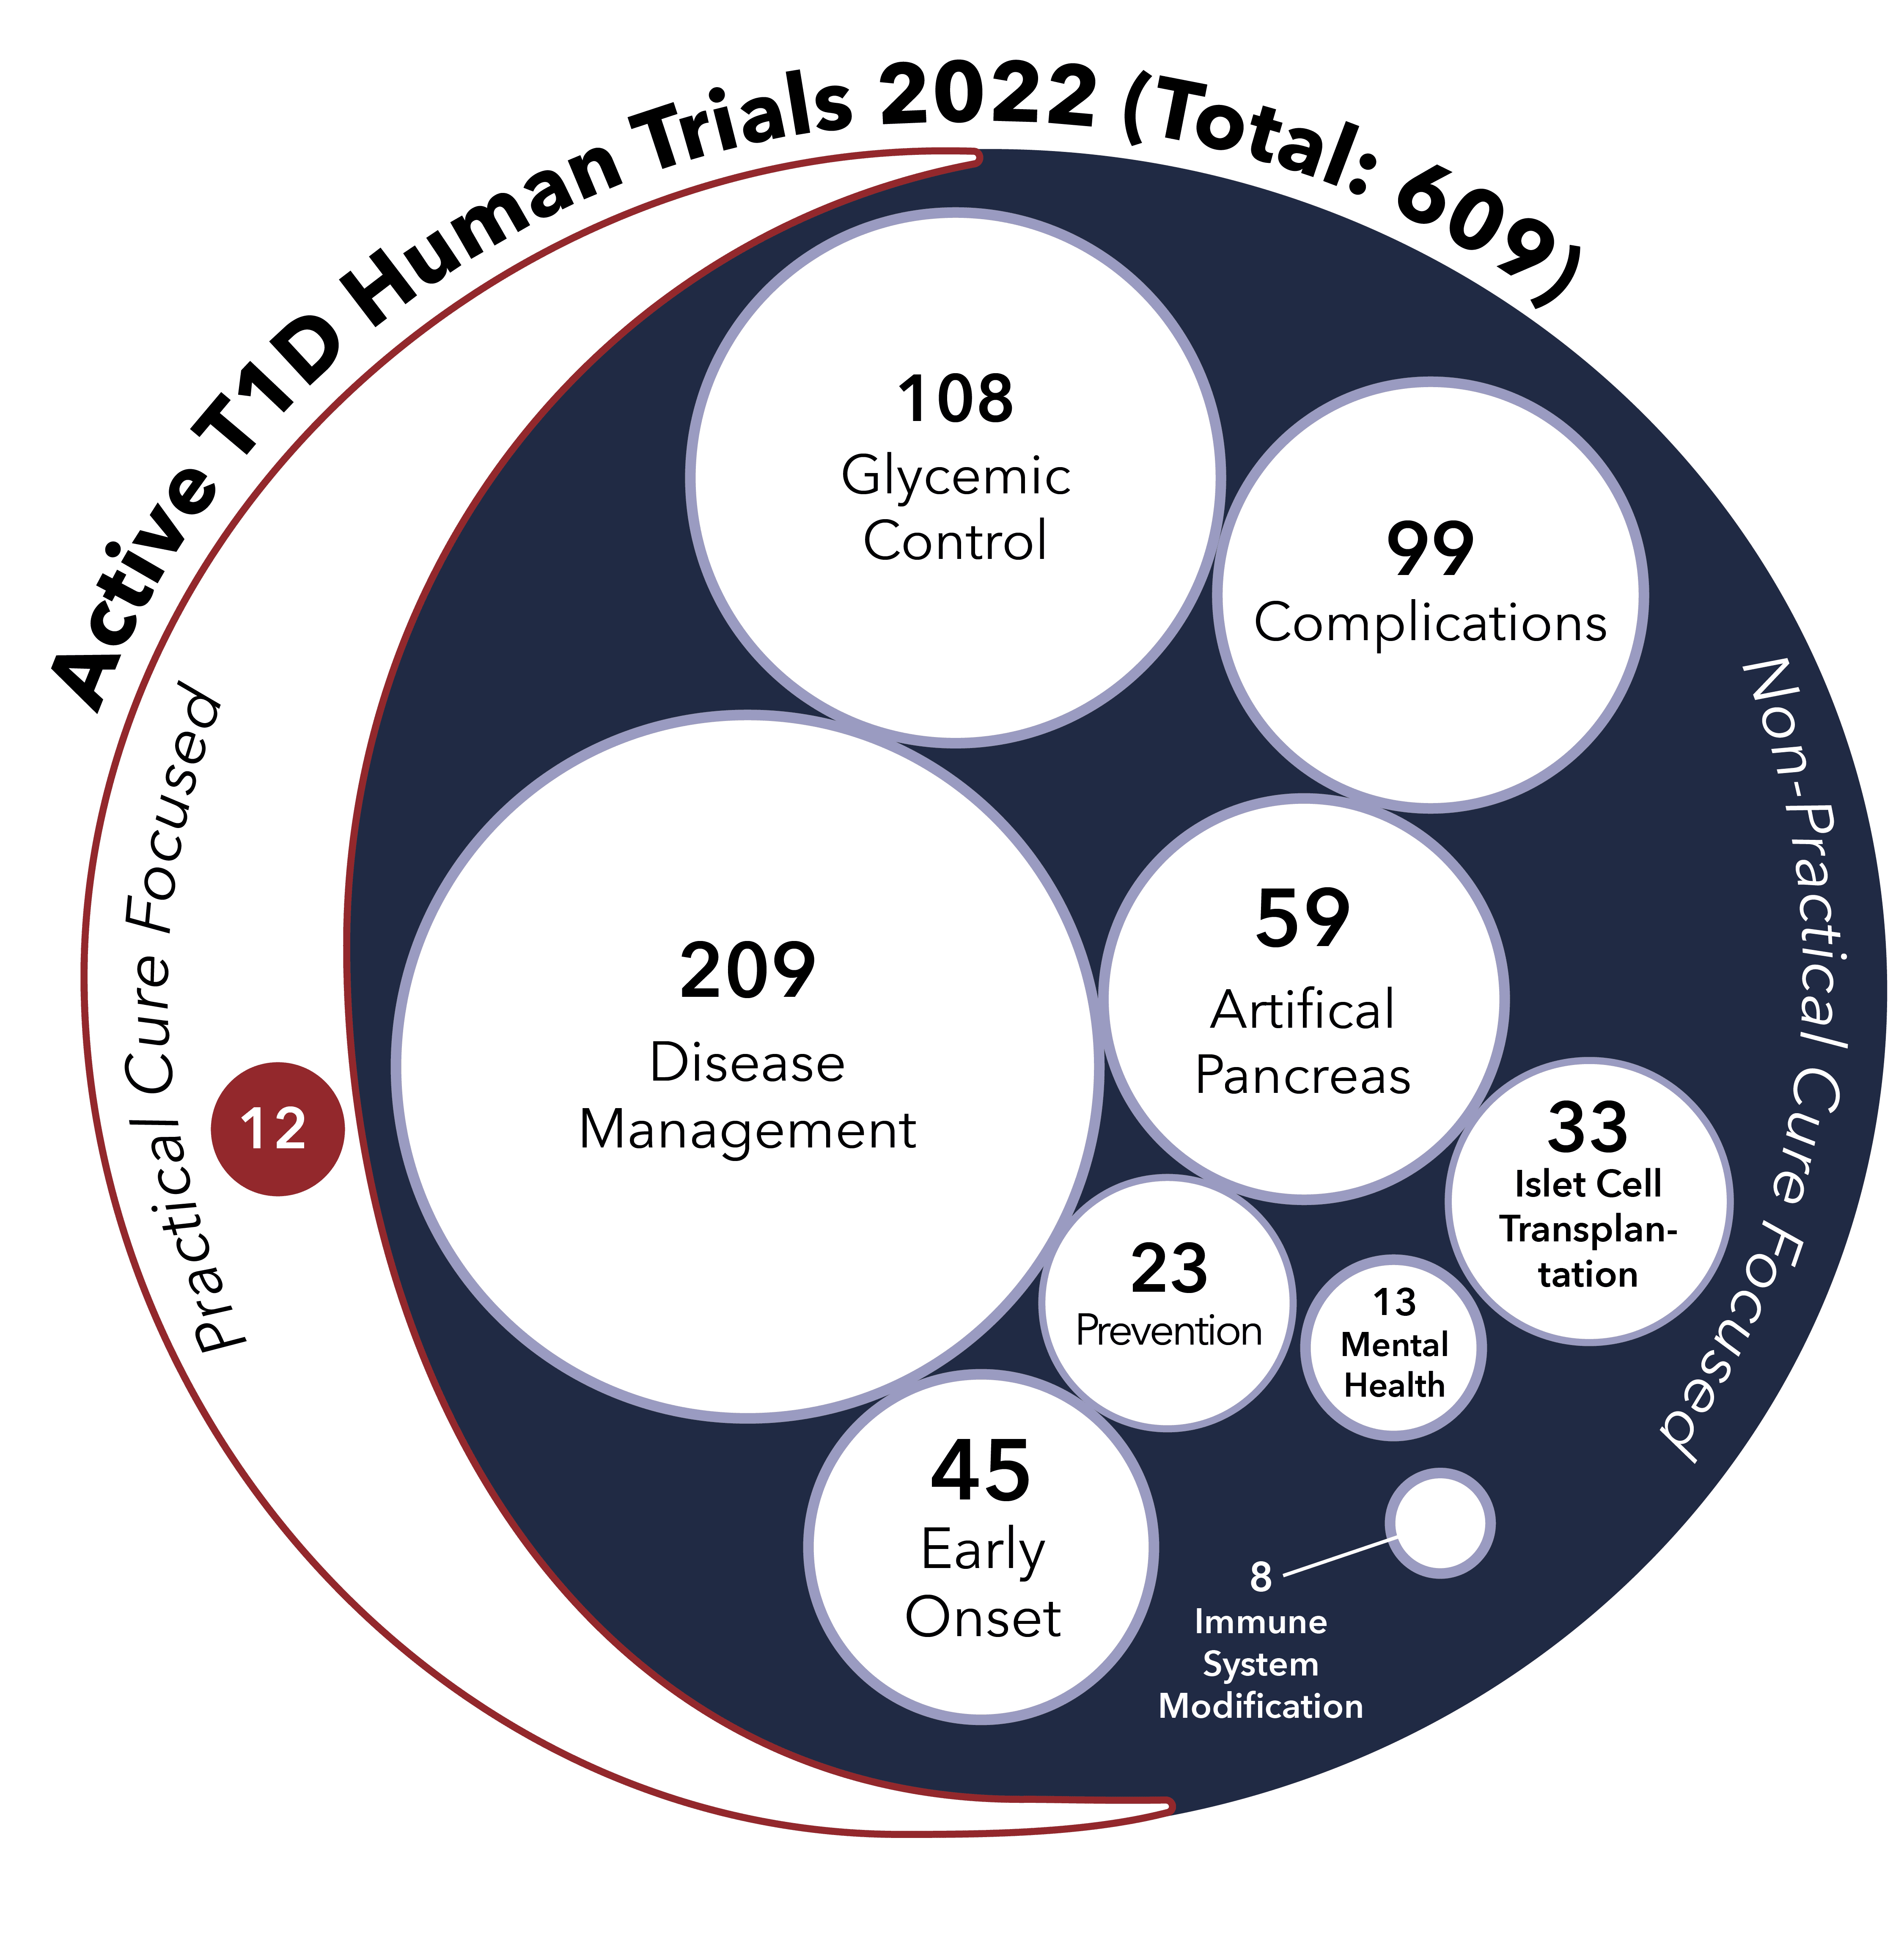 2022 Clinical Trial Review: Only 2% of Projects Target Practical Cure